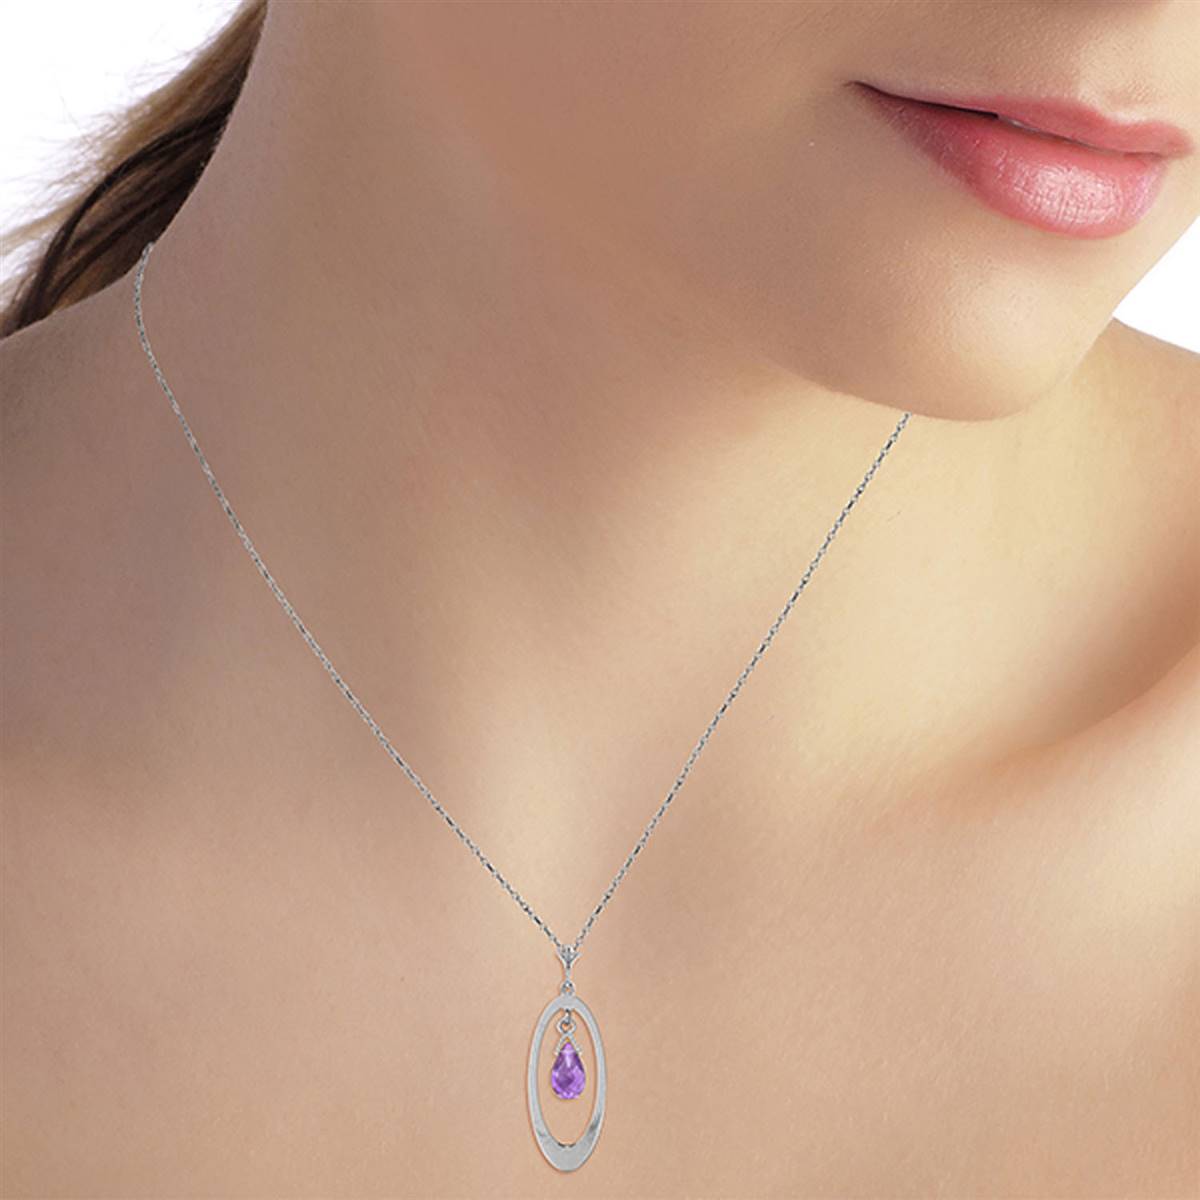 0.7 Carat 14K Solid White Gold Life's Pleasure Amethyst Necklace